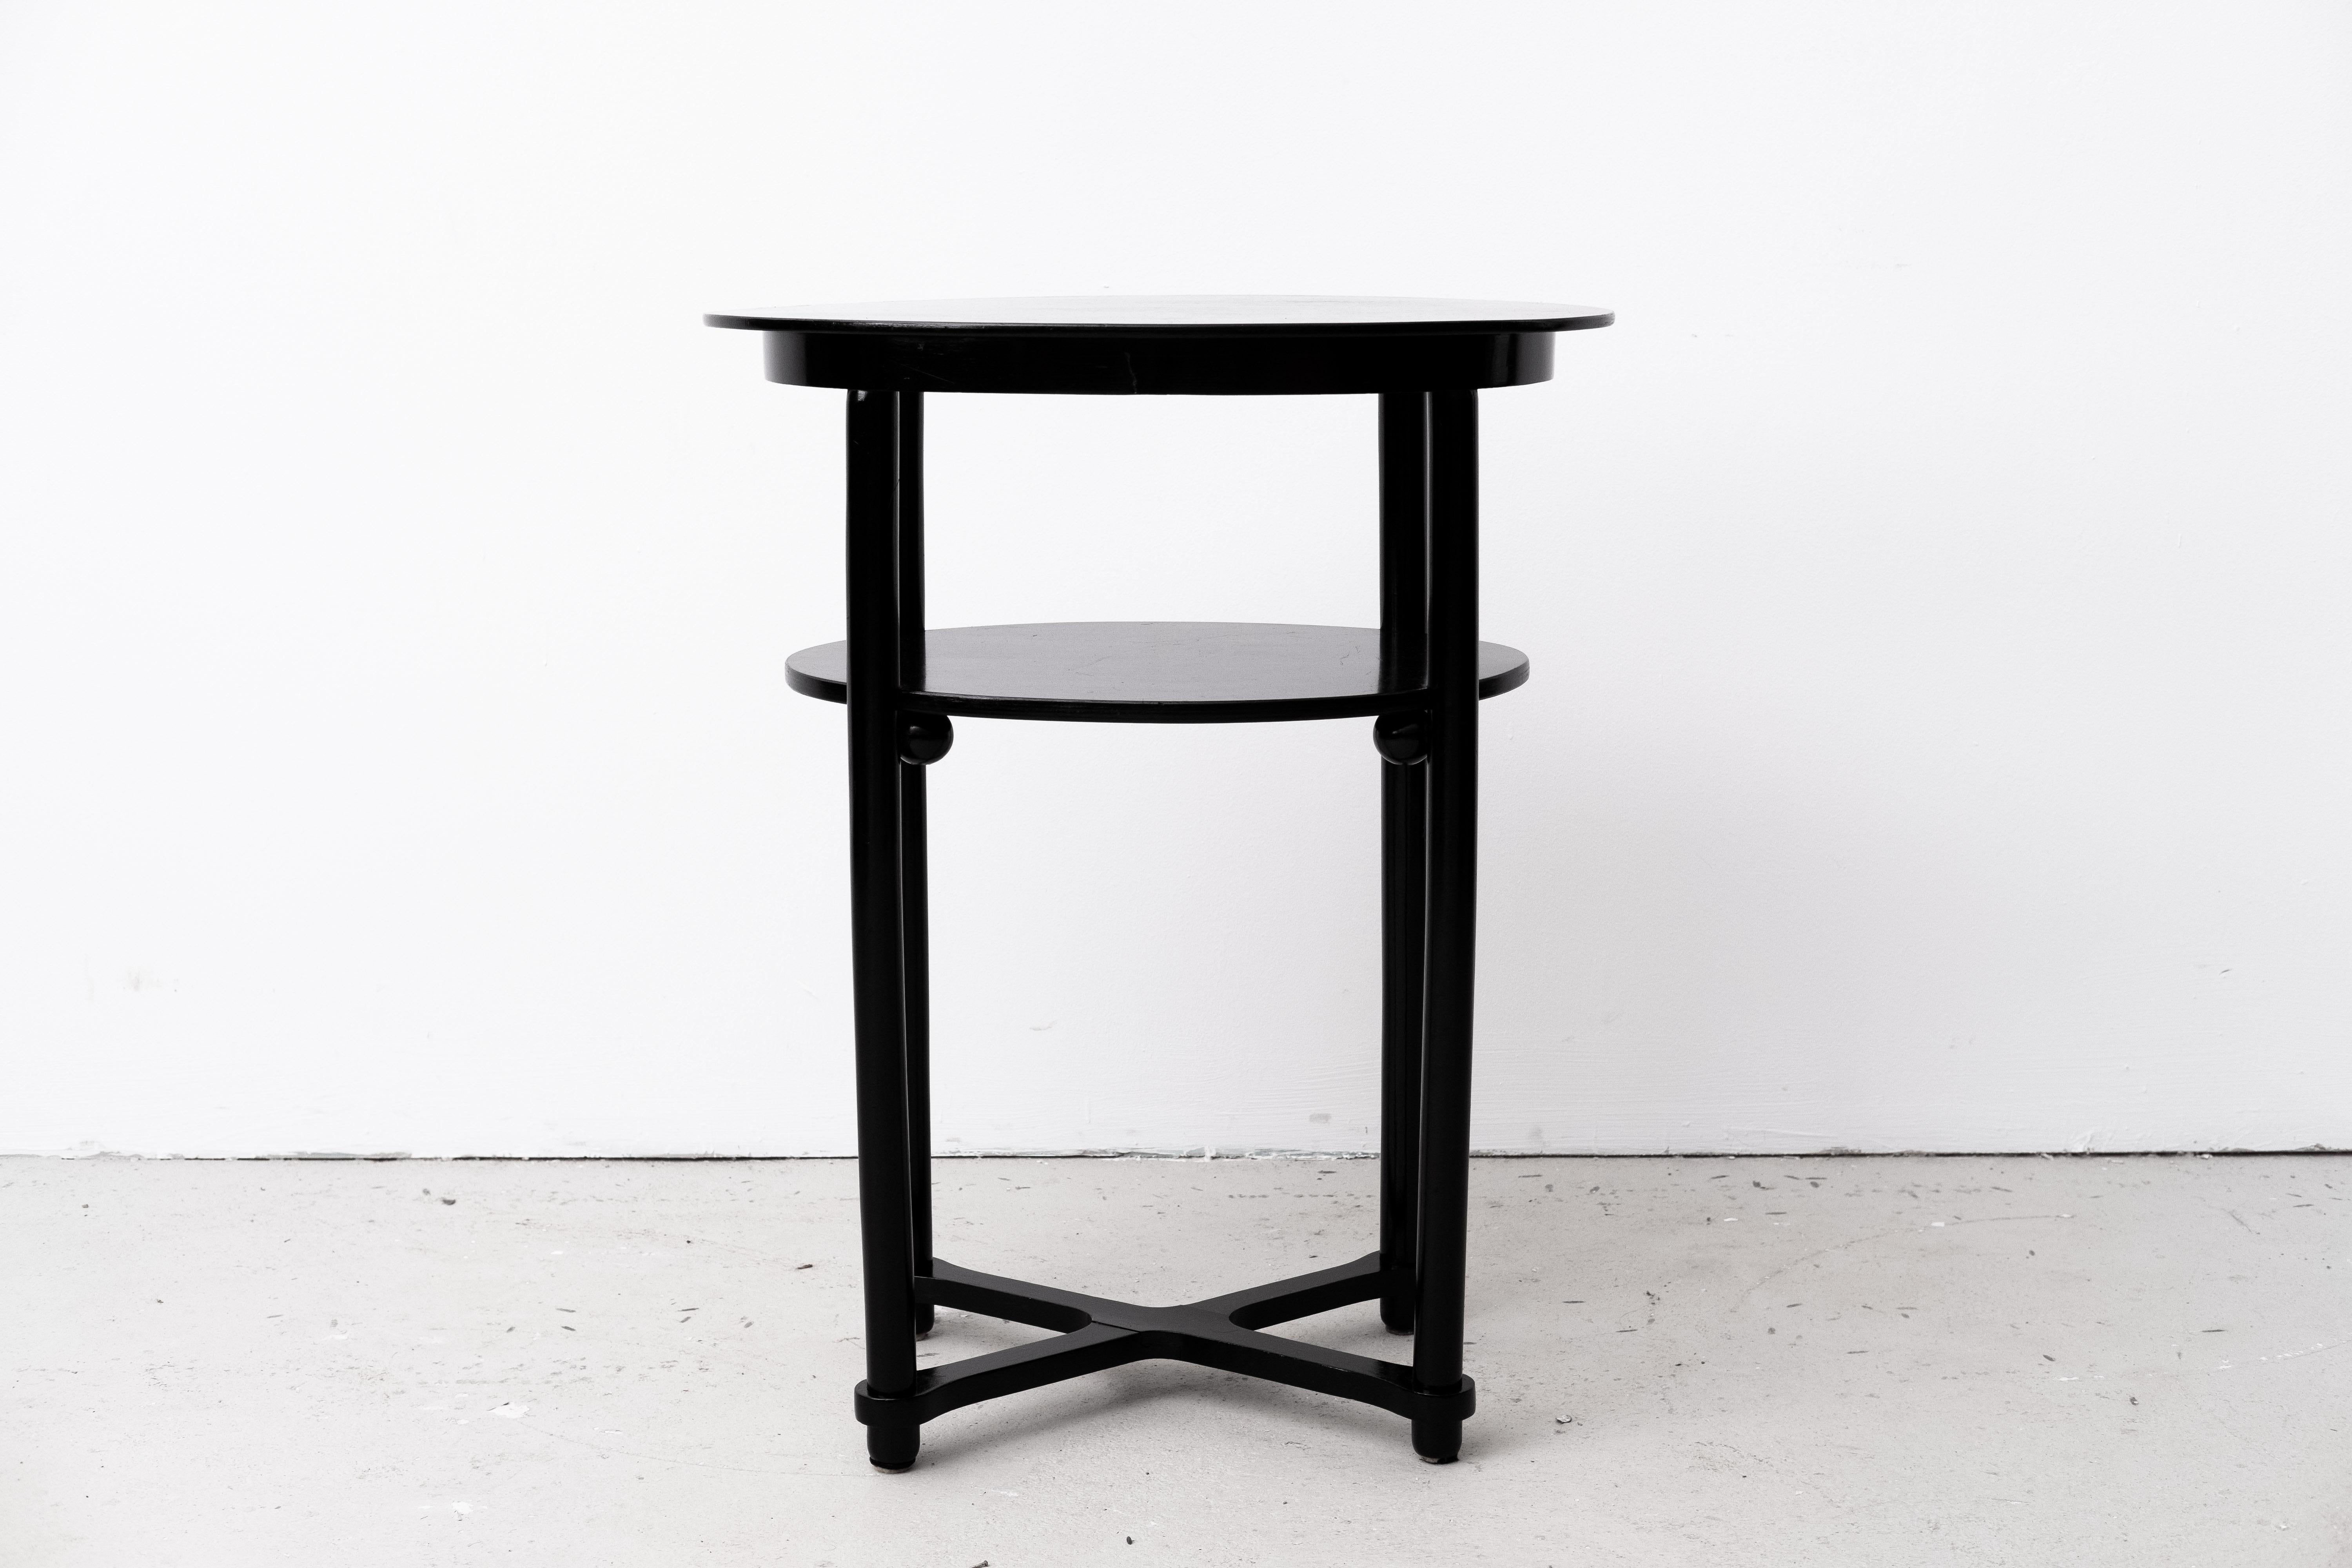 Early 20th Century Secession Sidetable, attr. to J. Hoffmann, ex. by Fischel & Söhne (CZK, 1915) For Sale